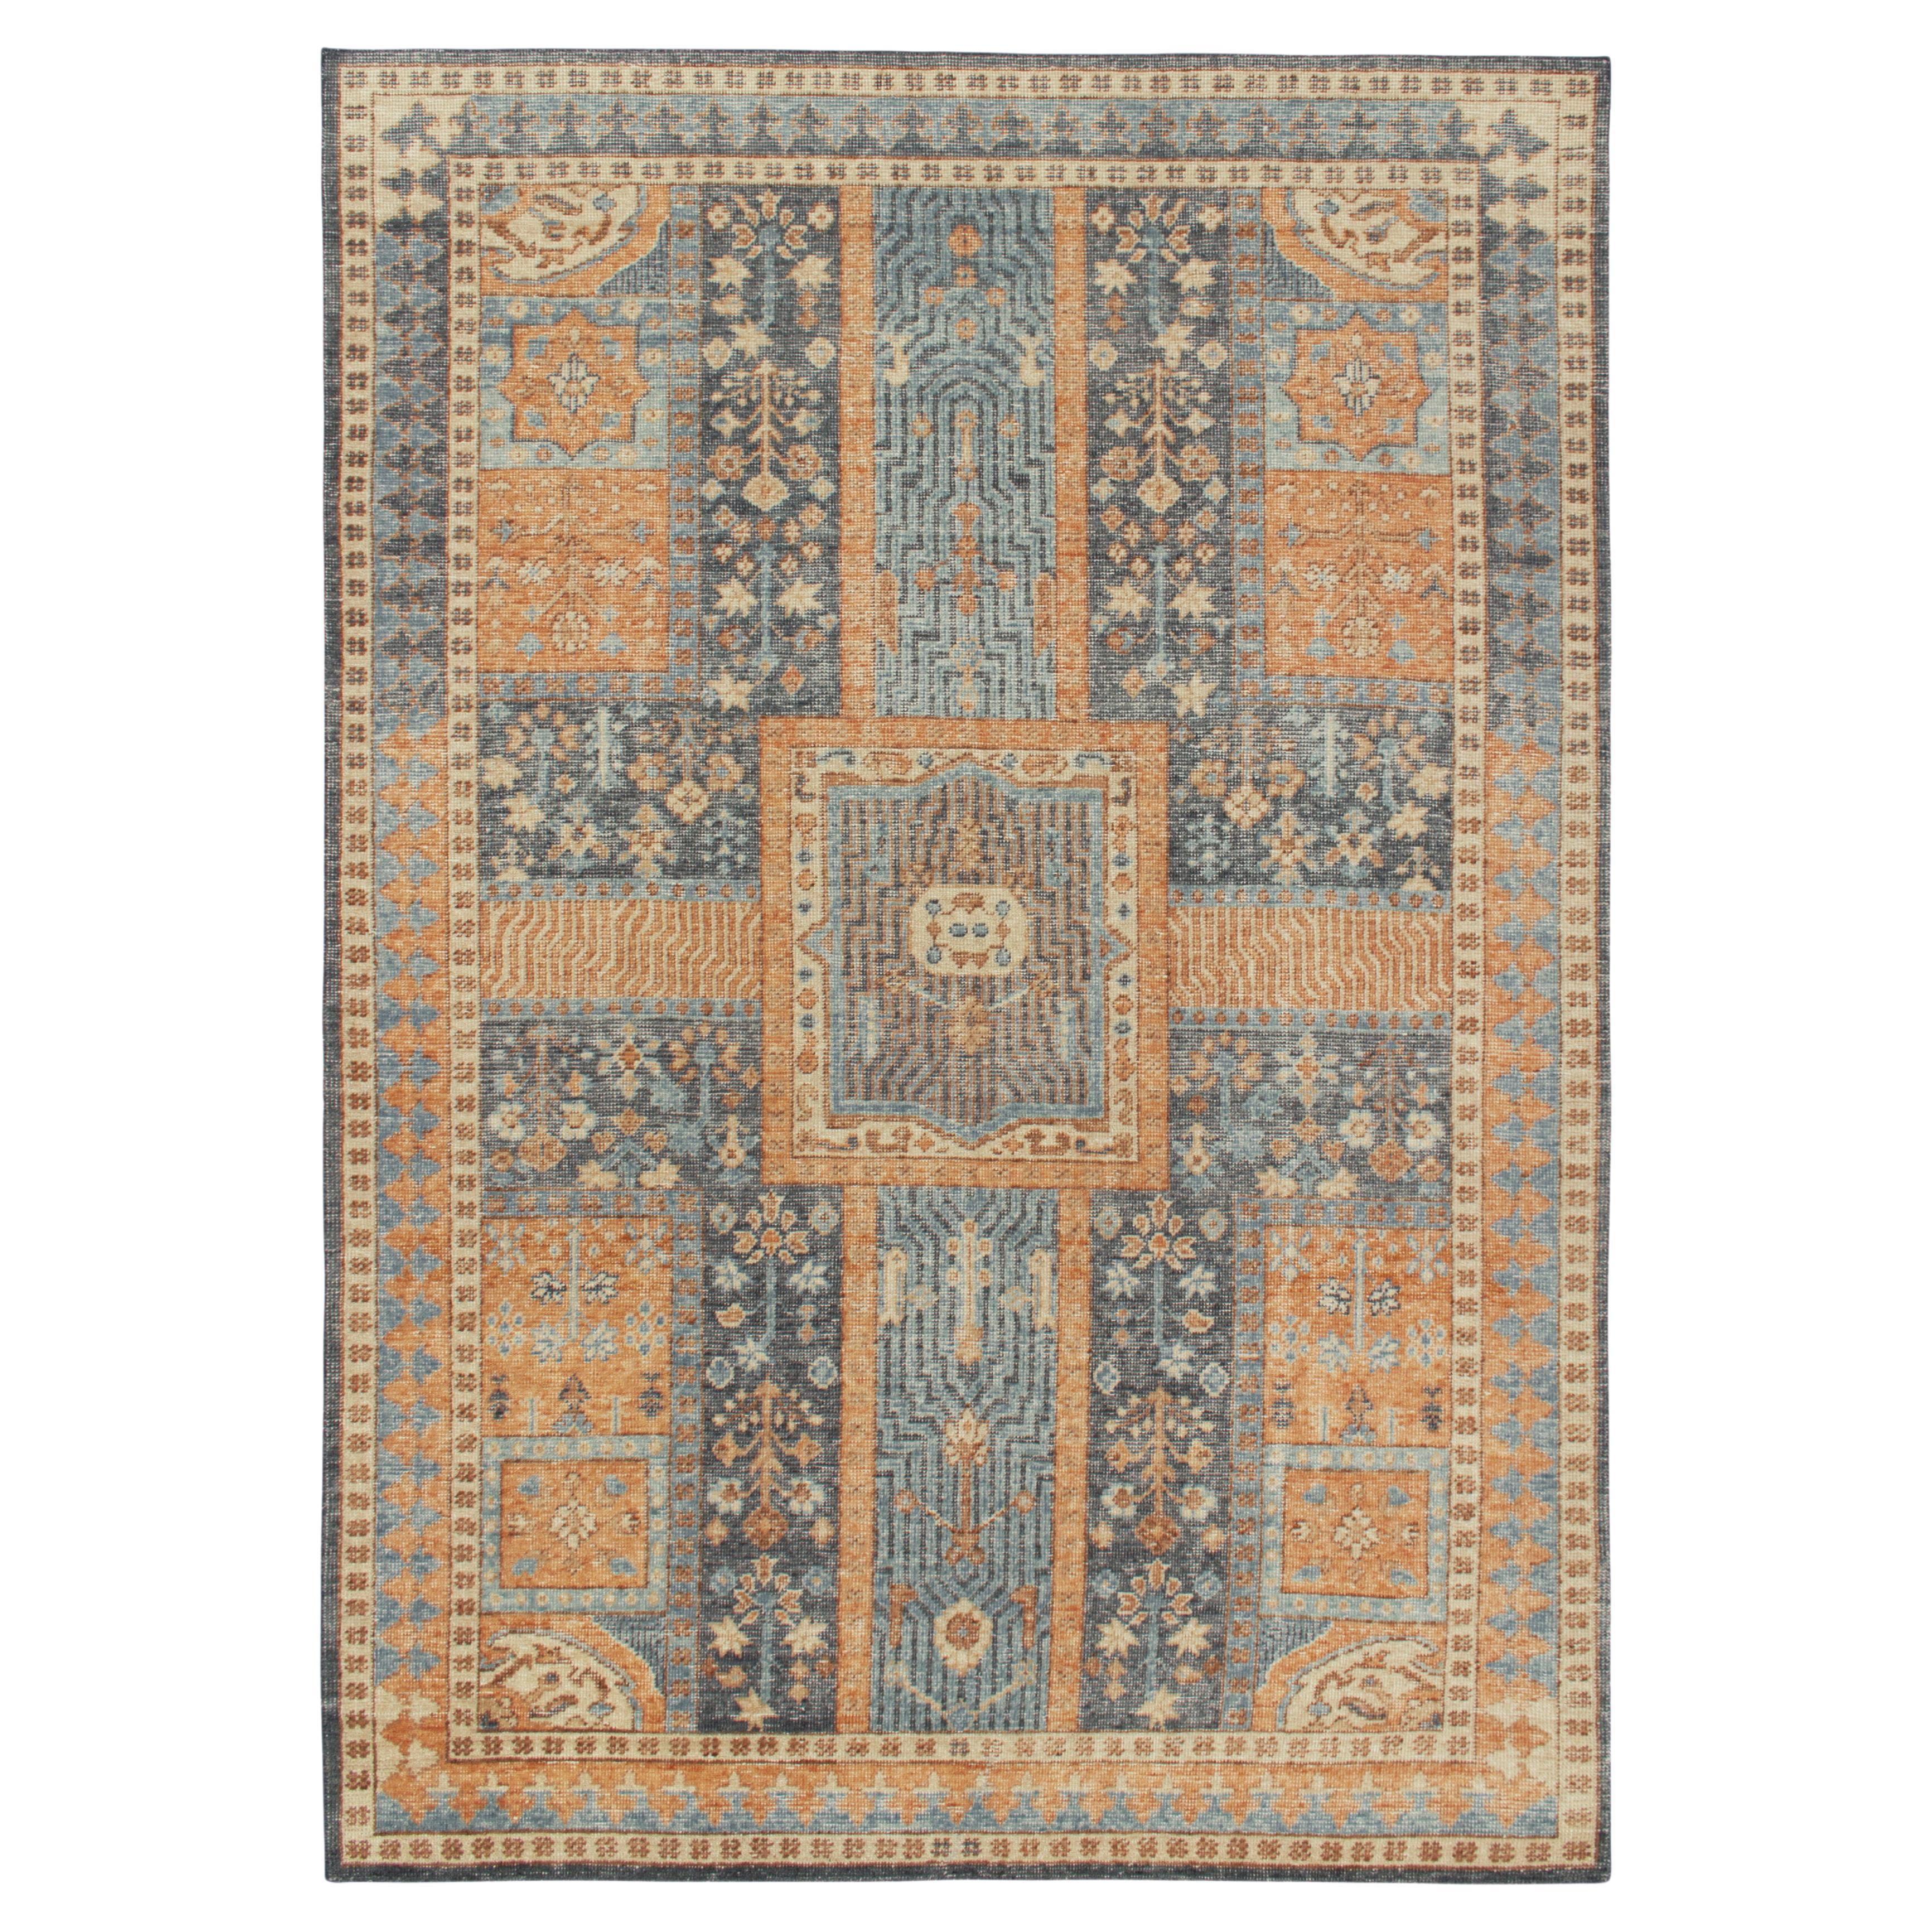 Rug & Kilim's Antique Persian Style Distressed Rug in Blue, Gold Garden Pattern